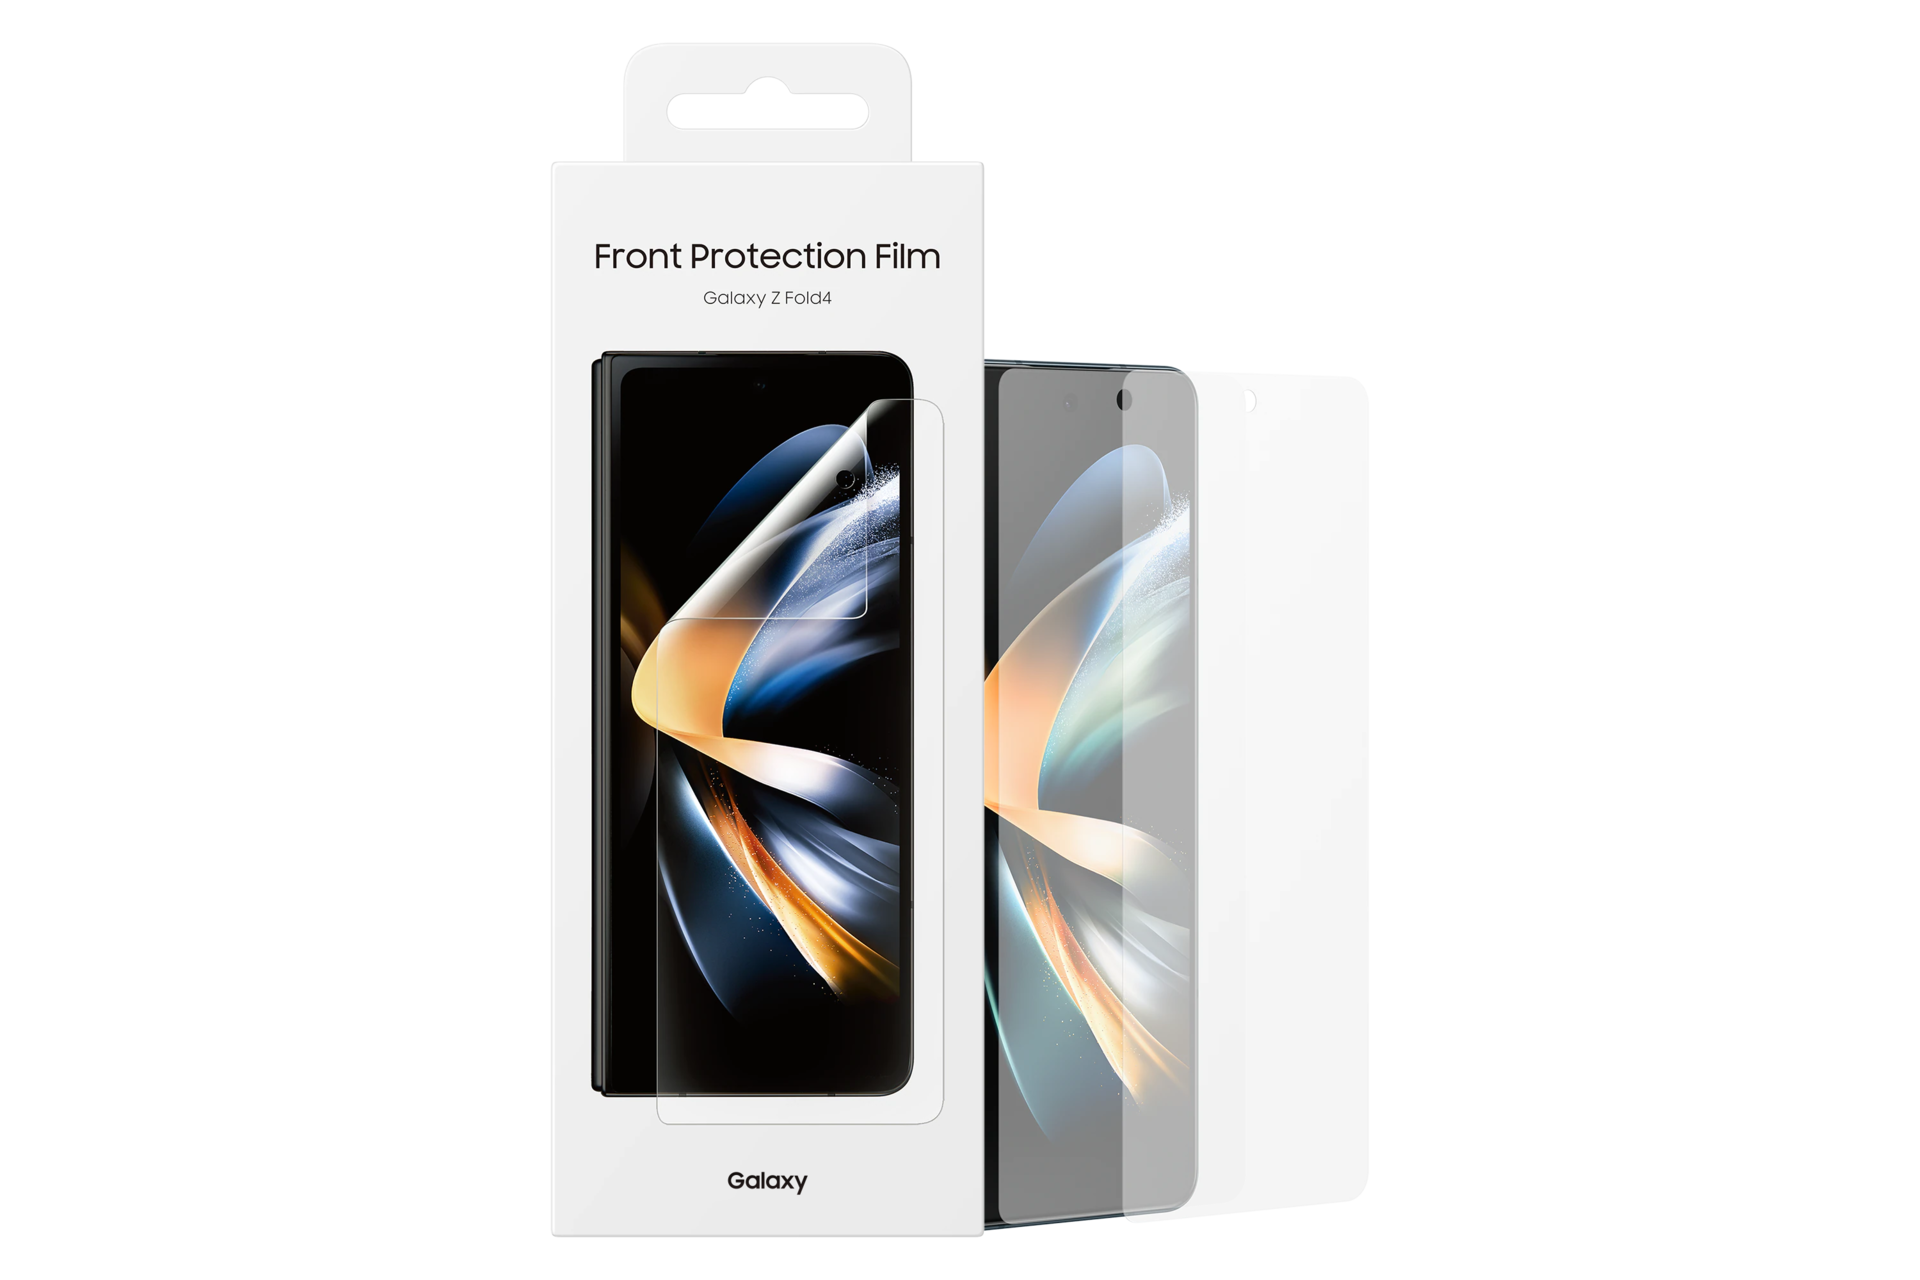 by Galaxy Z Fold4 Front Protection Film